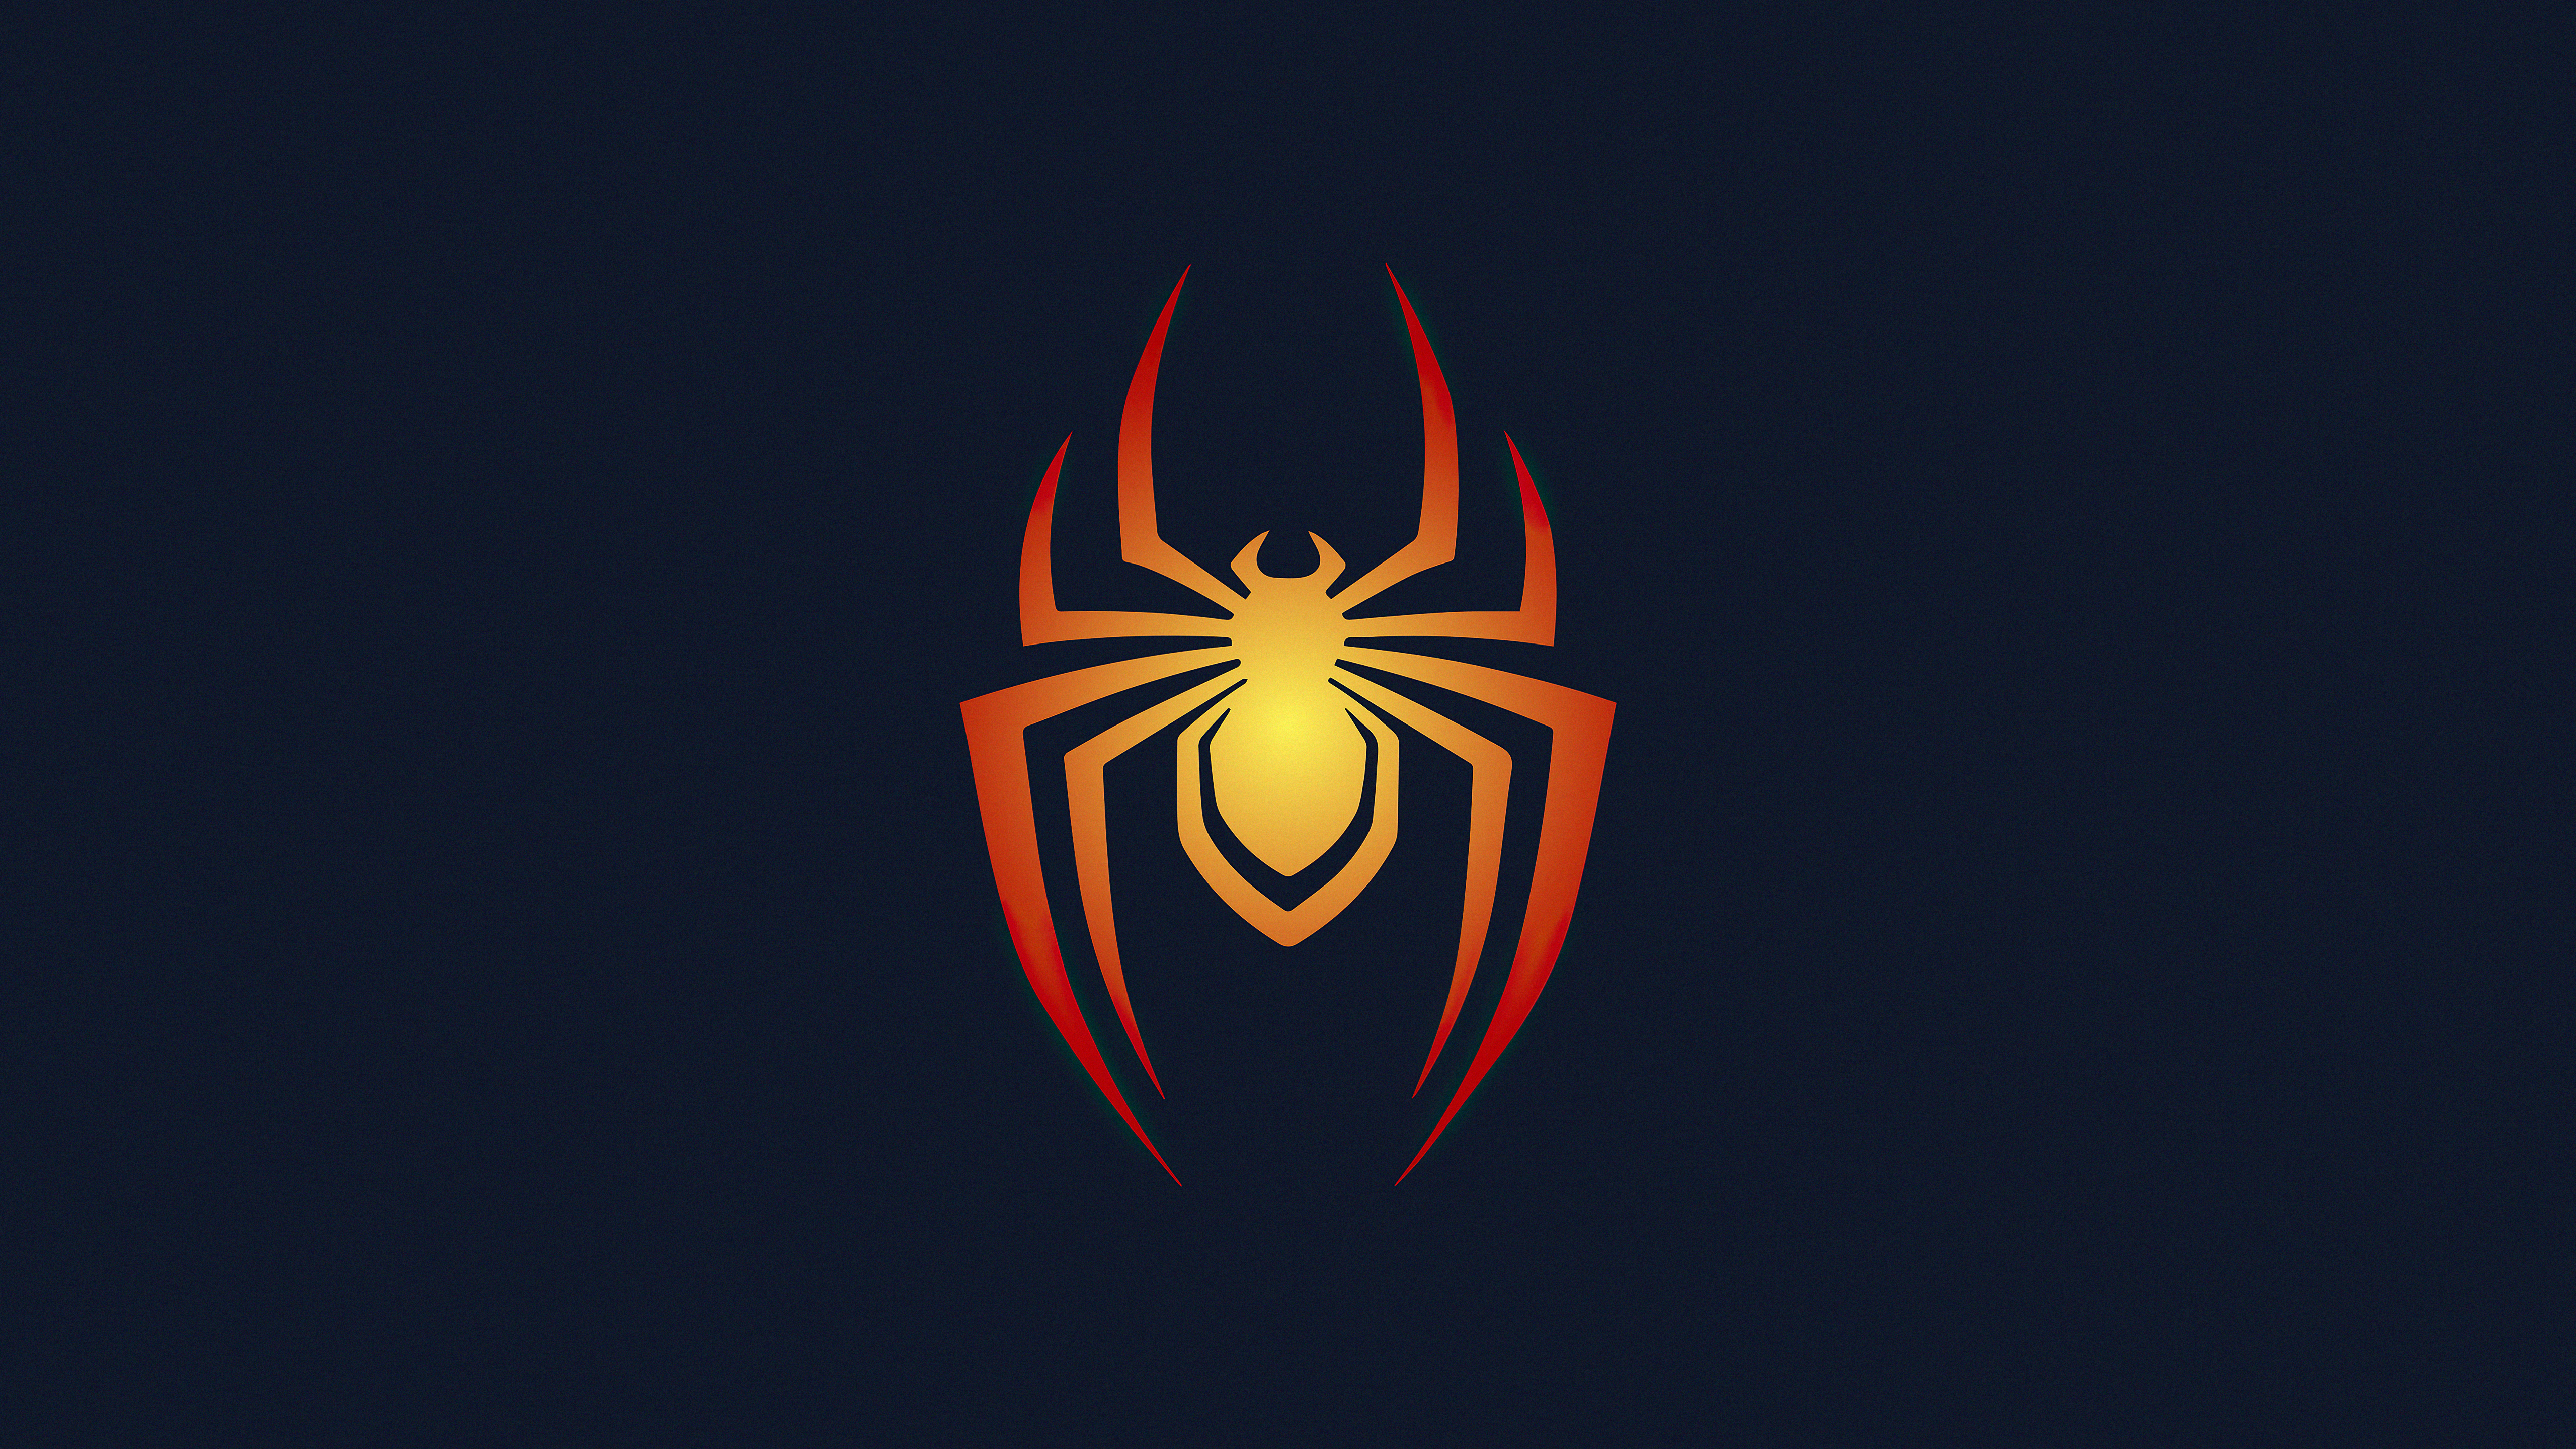 X spiderman logo minimal k moto gx xperia zz pactgalaxy snote iinexus hd k wallpapers images backgrounds photos and pictures